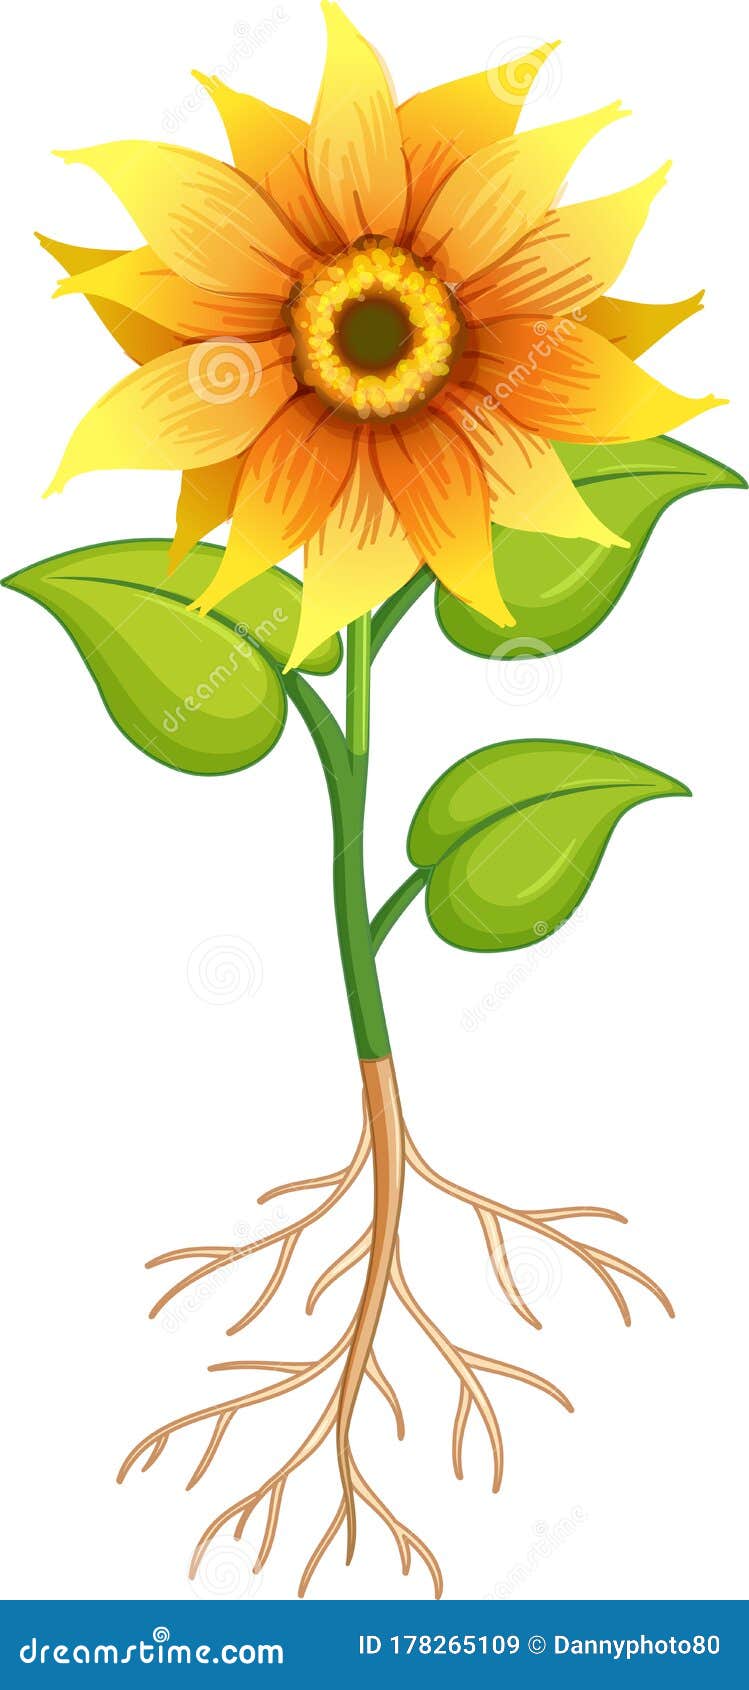 Sunflower Flower With Green Leaves And Roots On White